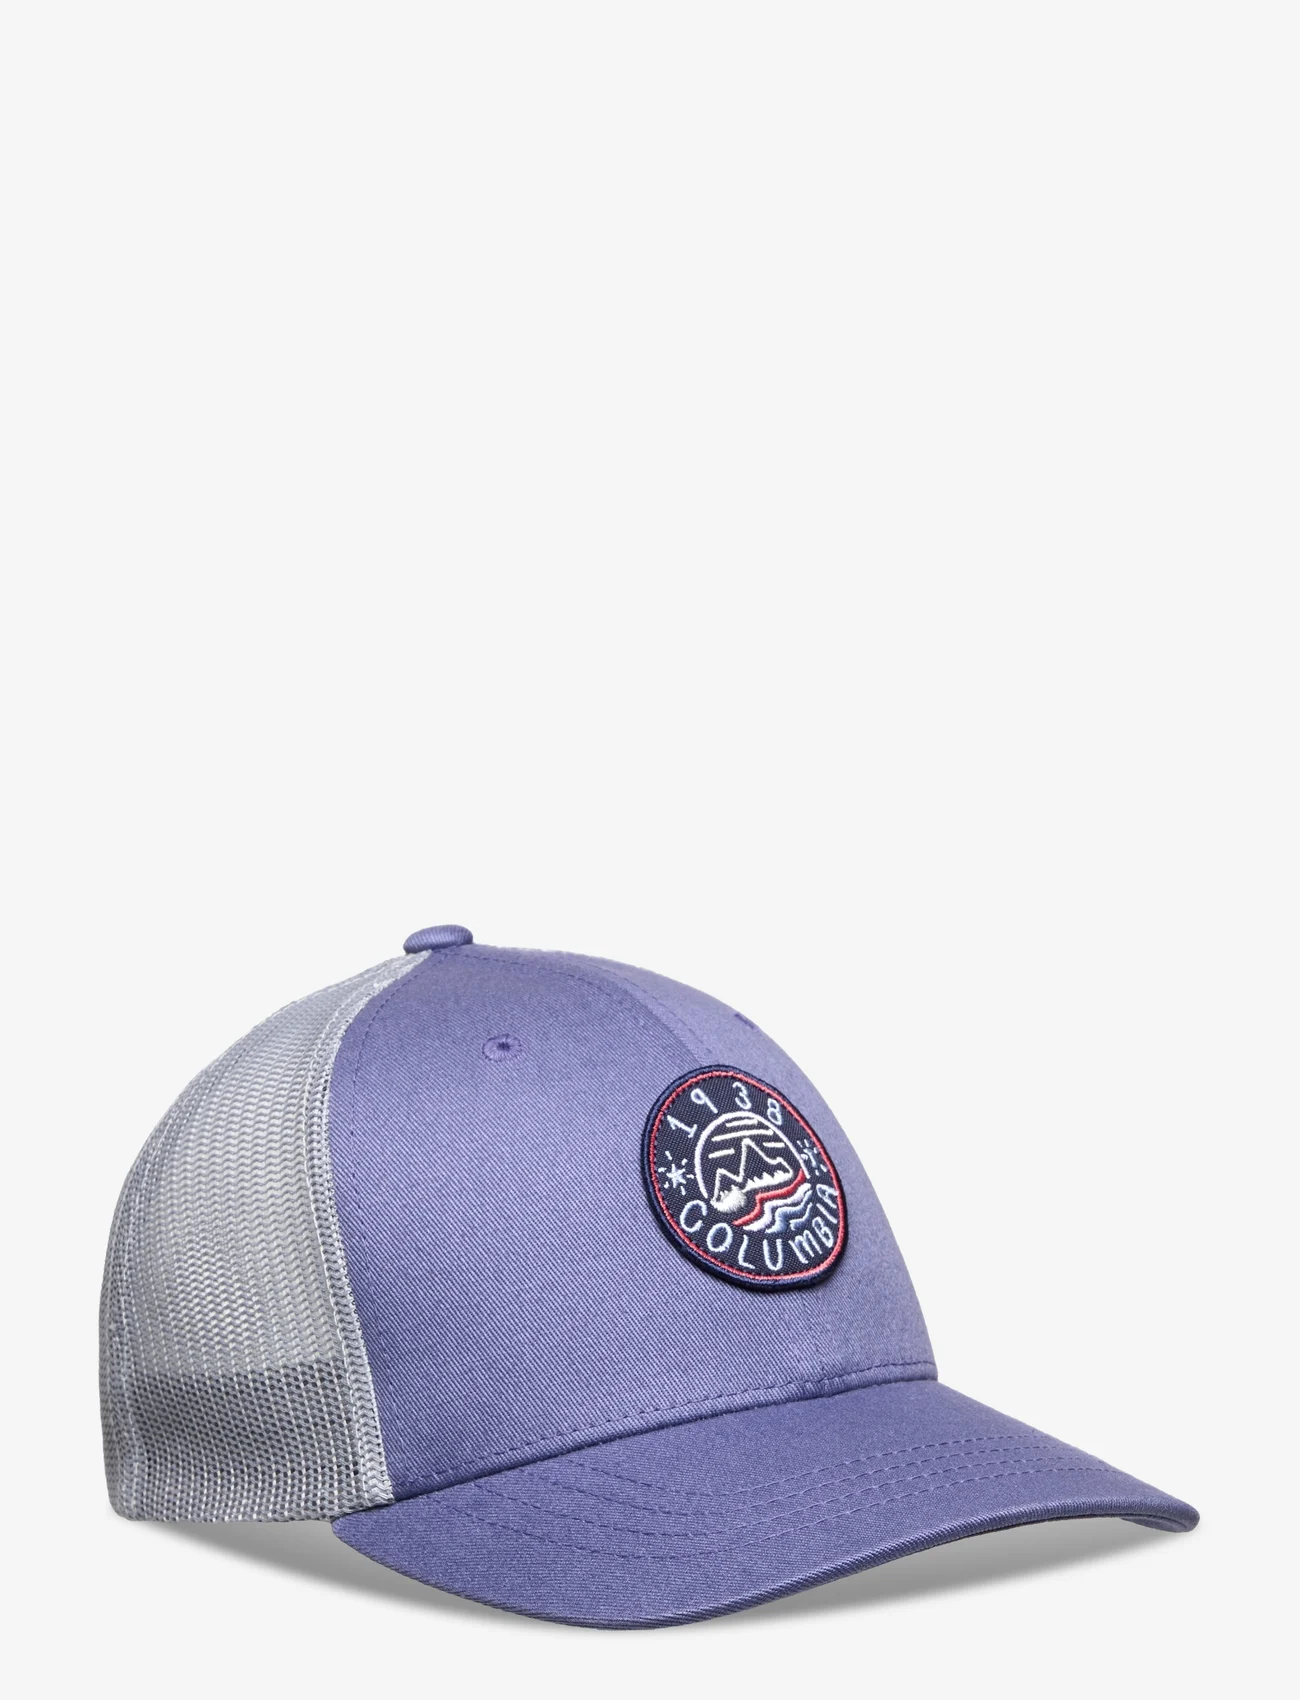 Columbia Sportswear - Columbia Youth Snap Back - sommerschnäppchen - eve, cirrus grey, hot marker waves - 0